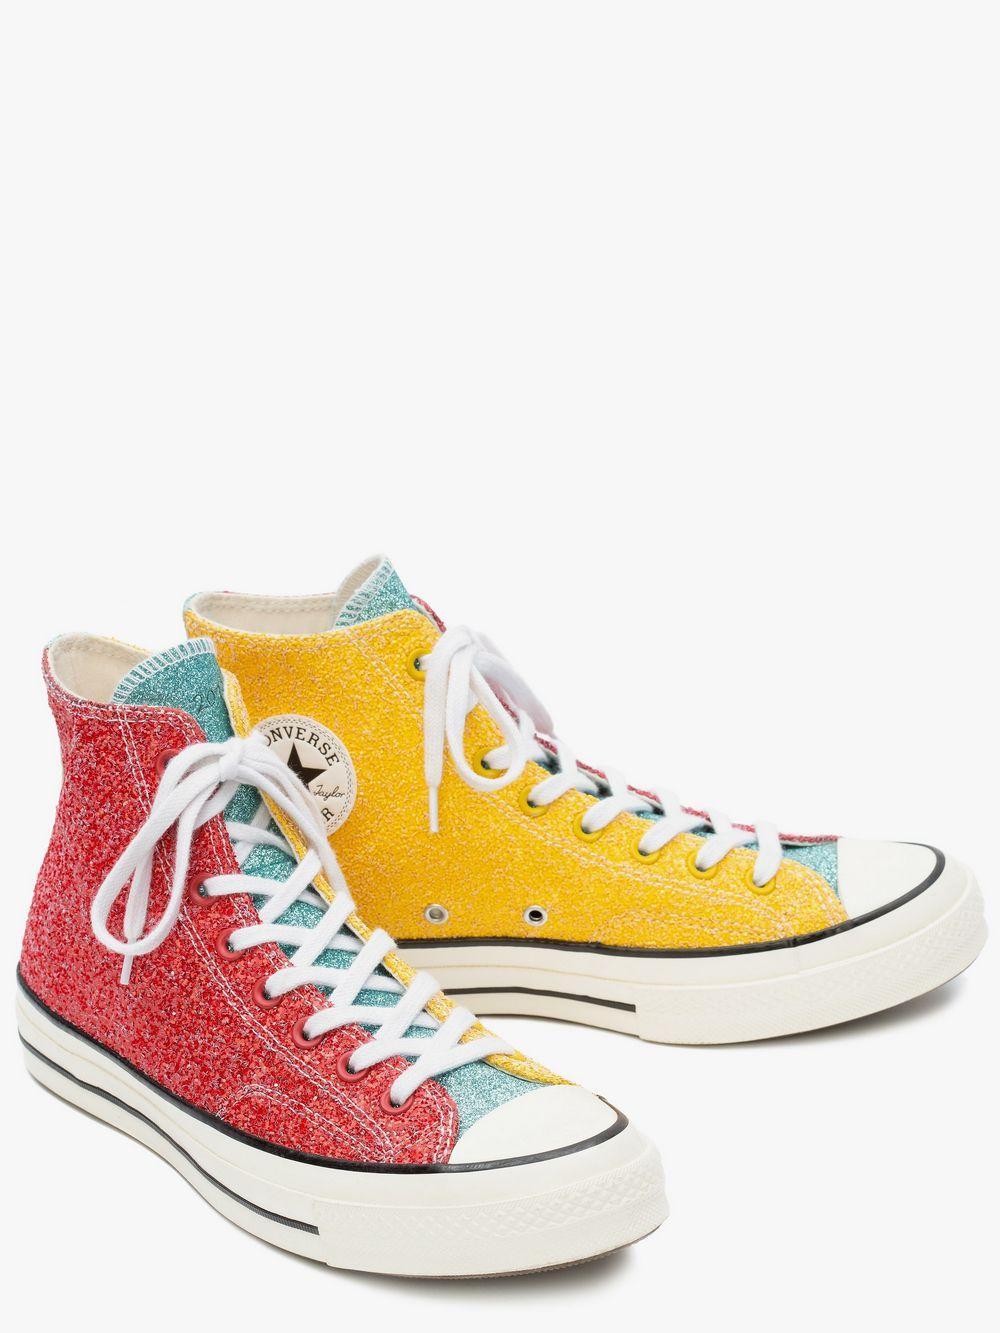 Shop - red and yellow converse - OFF 61 